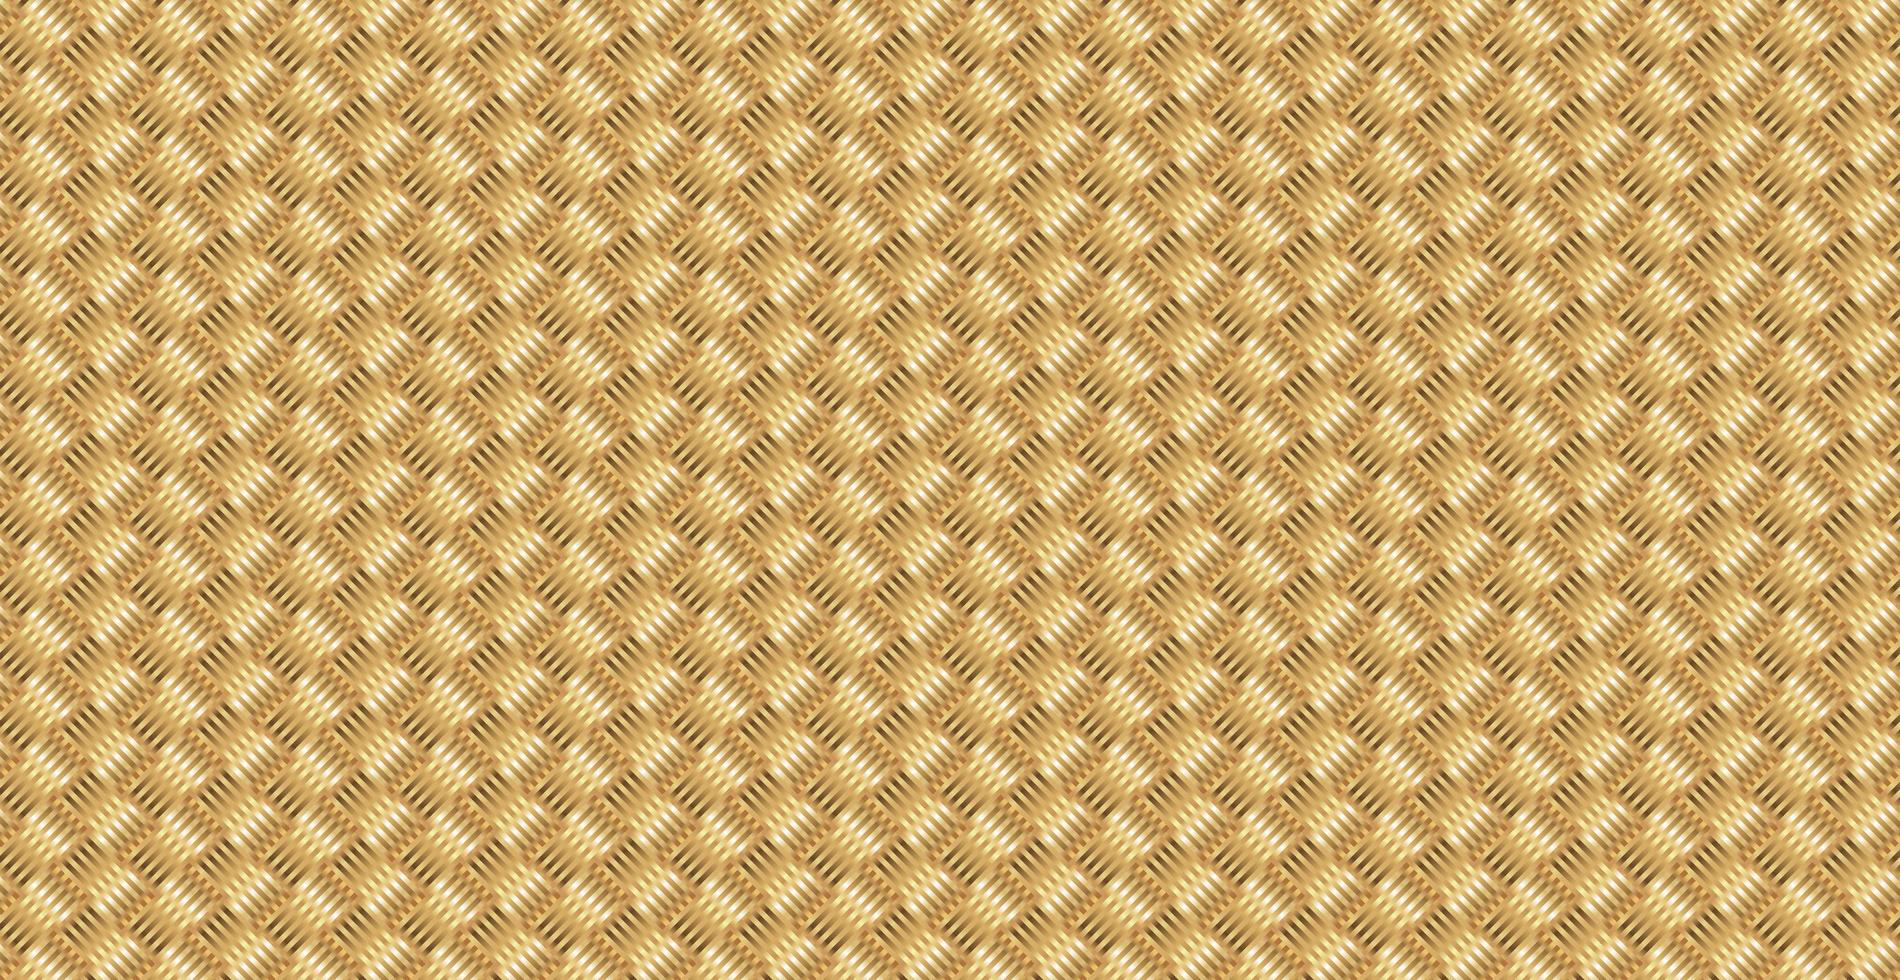 Panoramic golden wicker background, repeating elements - Vector